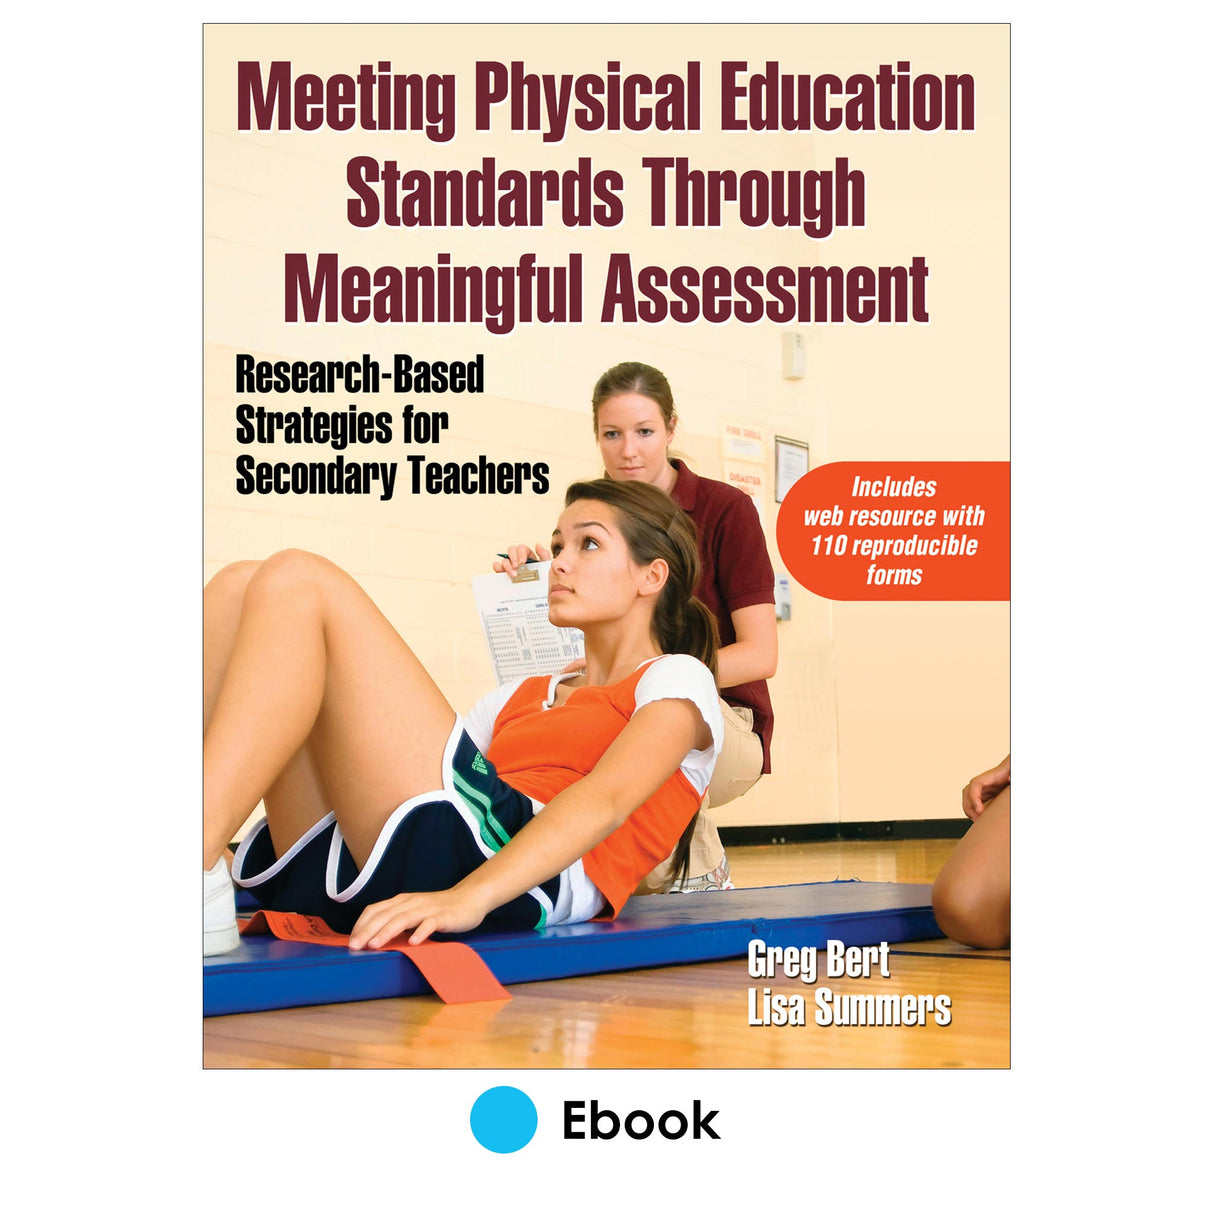 Meeting Physical Education Standards Through Meaningful Assessment PDF With Web Resource